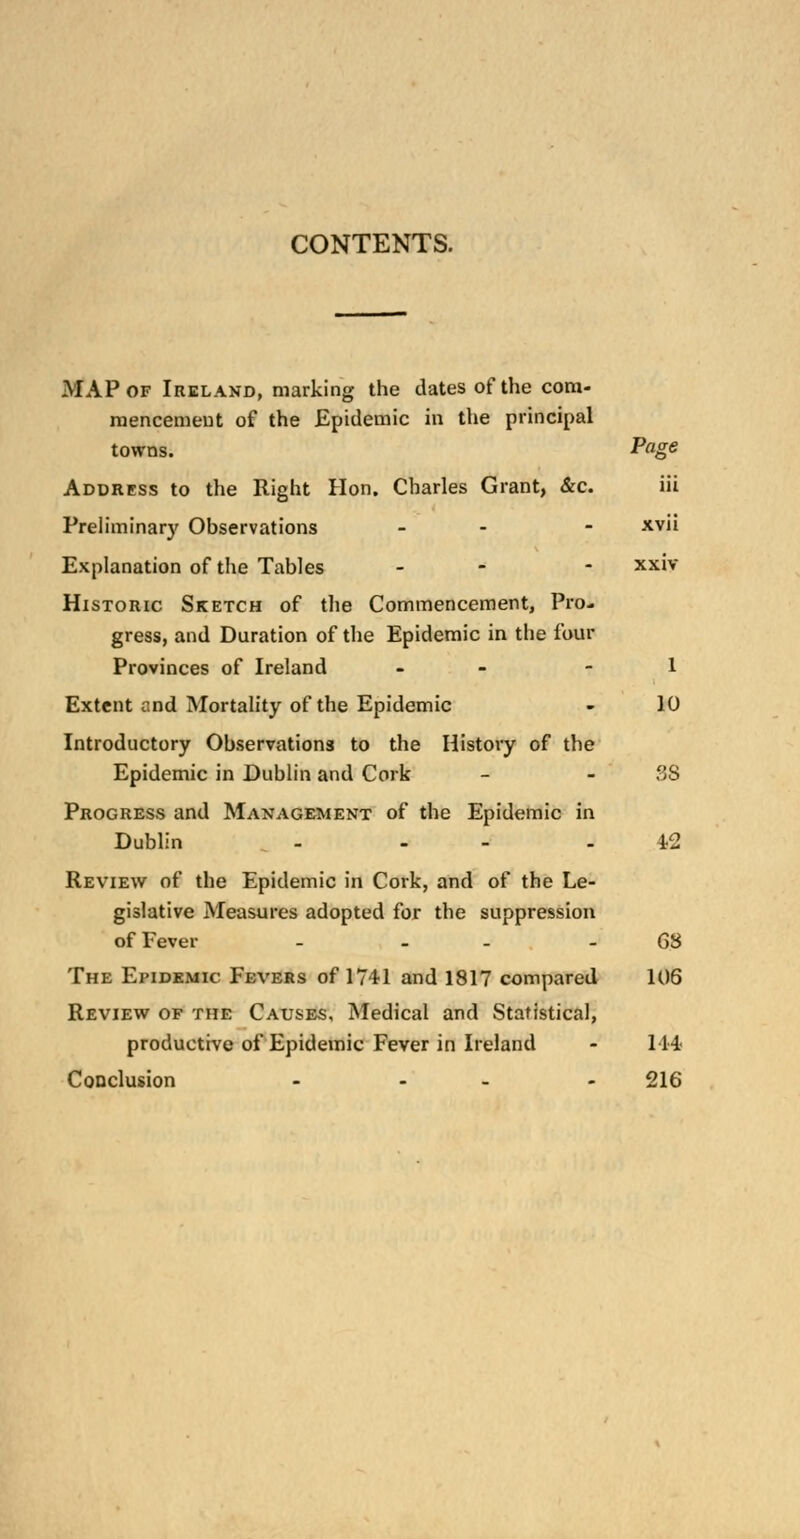 CONTENTS. MAP of Ireland, marking the dates of the com- mencement of the Epidemic in the principal towns. Page Address to the Right Hon. Charles Grant, &c. iii Preliminary Observations - - xvii Explanation of the Tables - - xxiv Historic Sketch of the Commencement, Pro- gress, and Duration of the Epidemic in the four Provinces of Ireland - - 1 Extent and Mortality of the Epidemic - 10 Introductory Observations to the History of the Epidemic in Dublin and Cork - - 3S Progress and Management of the Epidemic in Dublin - - 42 Review of the Epidemic in Cork, and of the Le- gislative Measures adopted for the suppression of Fever - - - - 68 The Epidemic Fevers of 1741 and 1817 compared 106 Review of the Causes, Medical and Statistical, productive of Epidemic Fever in Ireland - 114 Conclusion - - - 216